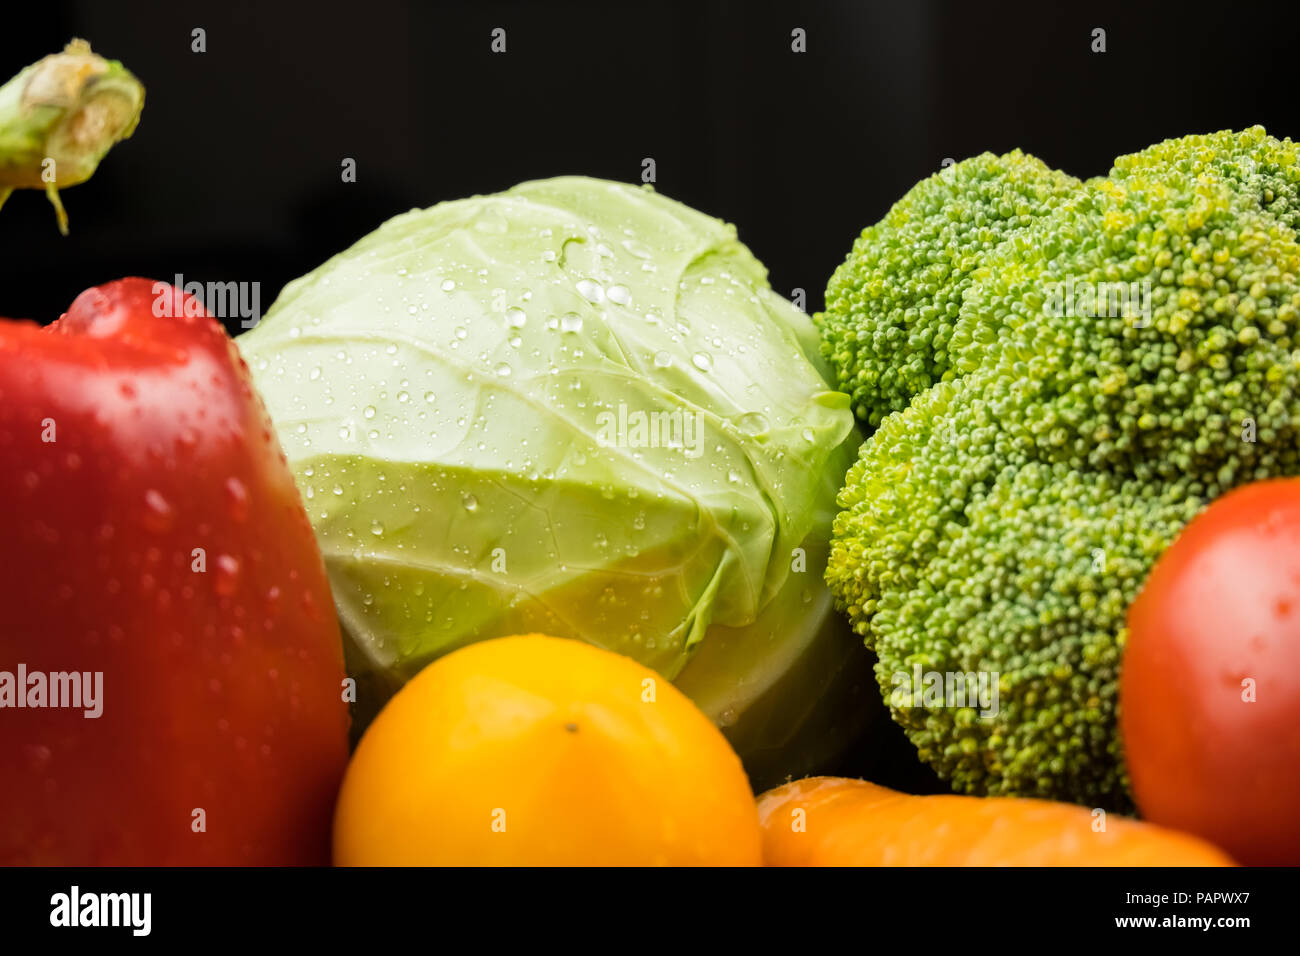 Close-up image of fresh organic vegetables. Locally grown cabbage, bell pepper, broccoli and other natural vegan food. Stock Photo